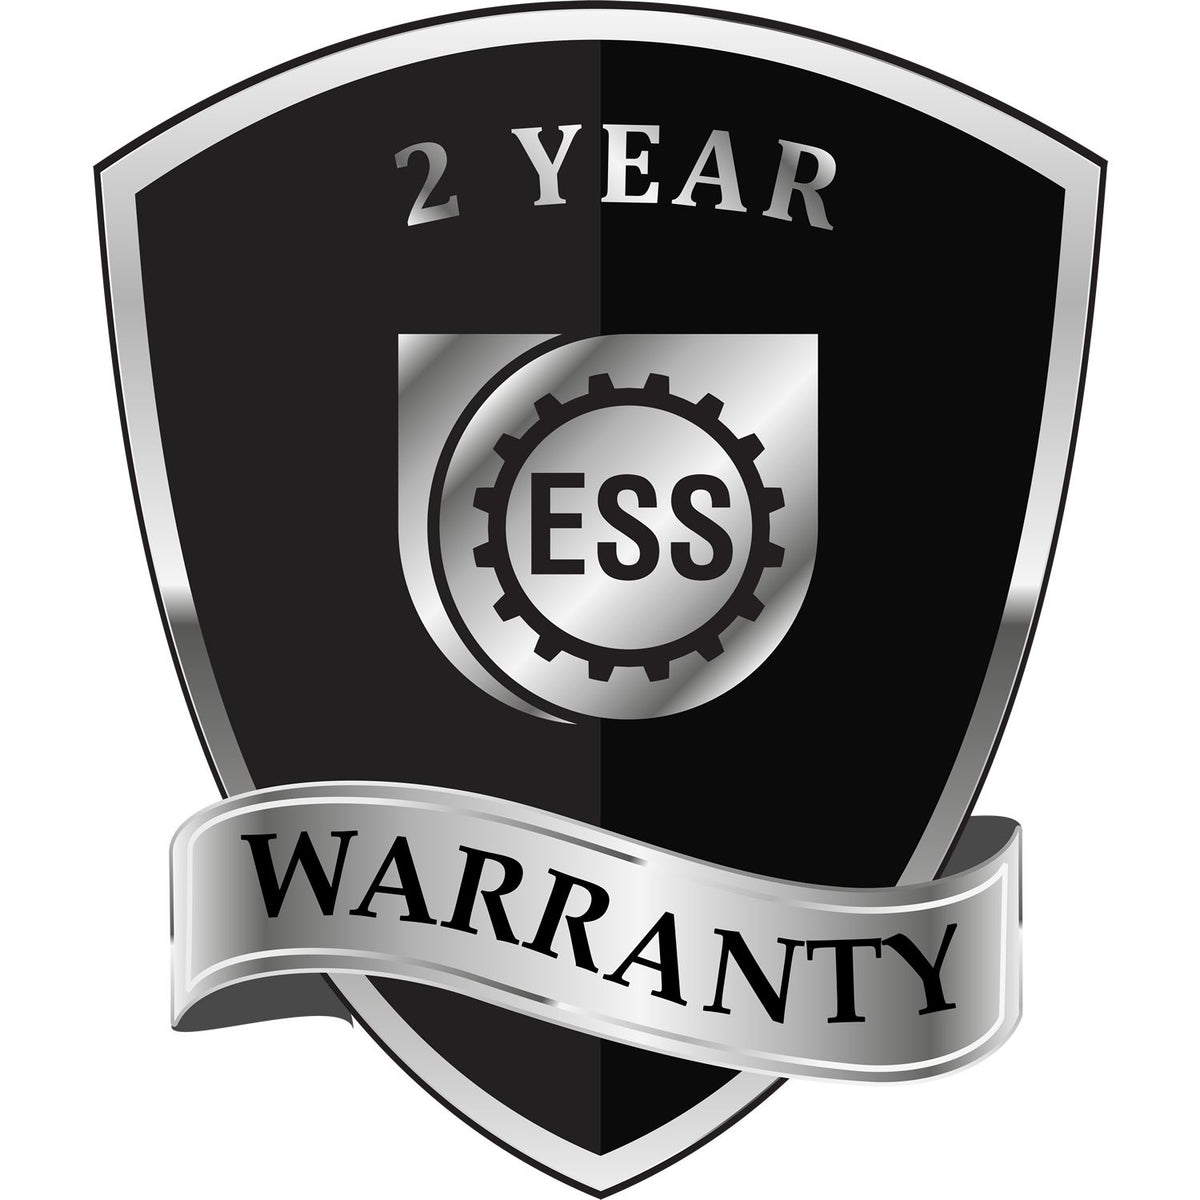 A badge or emblem showing a warranty icon for the Heavy Duty Cast Iron Alabama Land Surveyor Seal Embosser